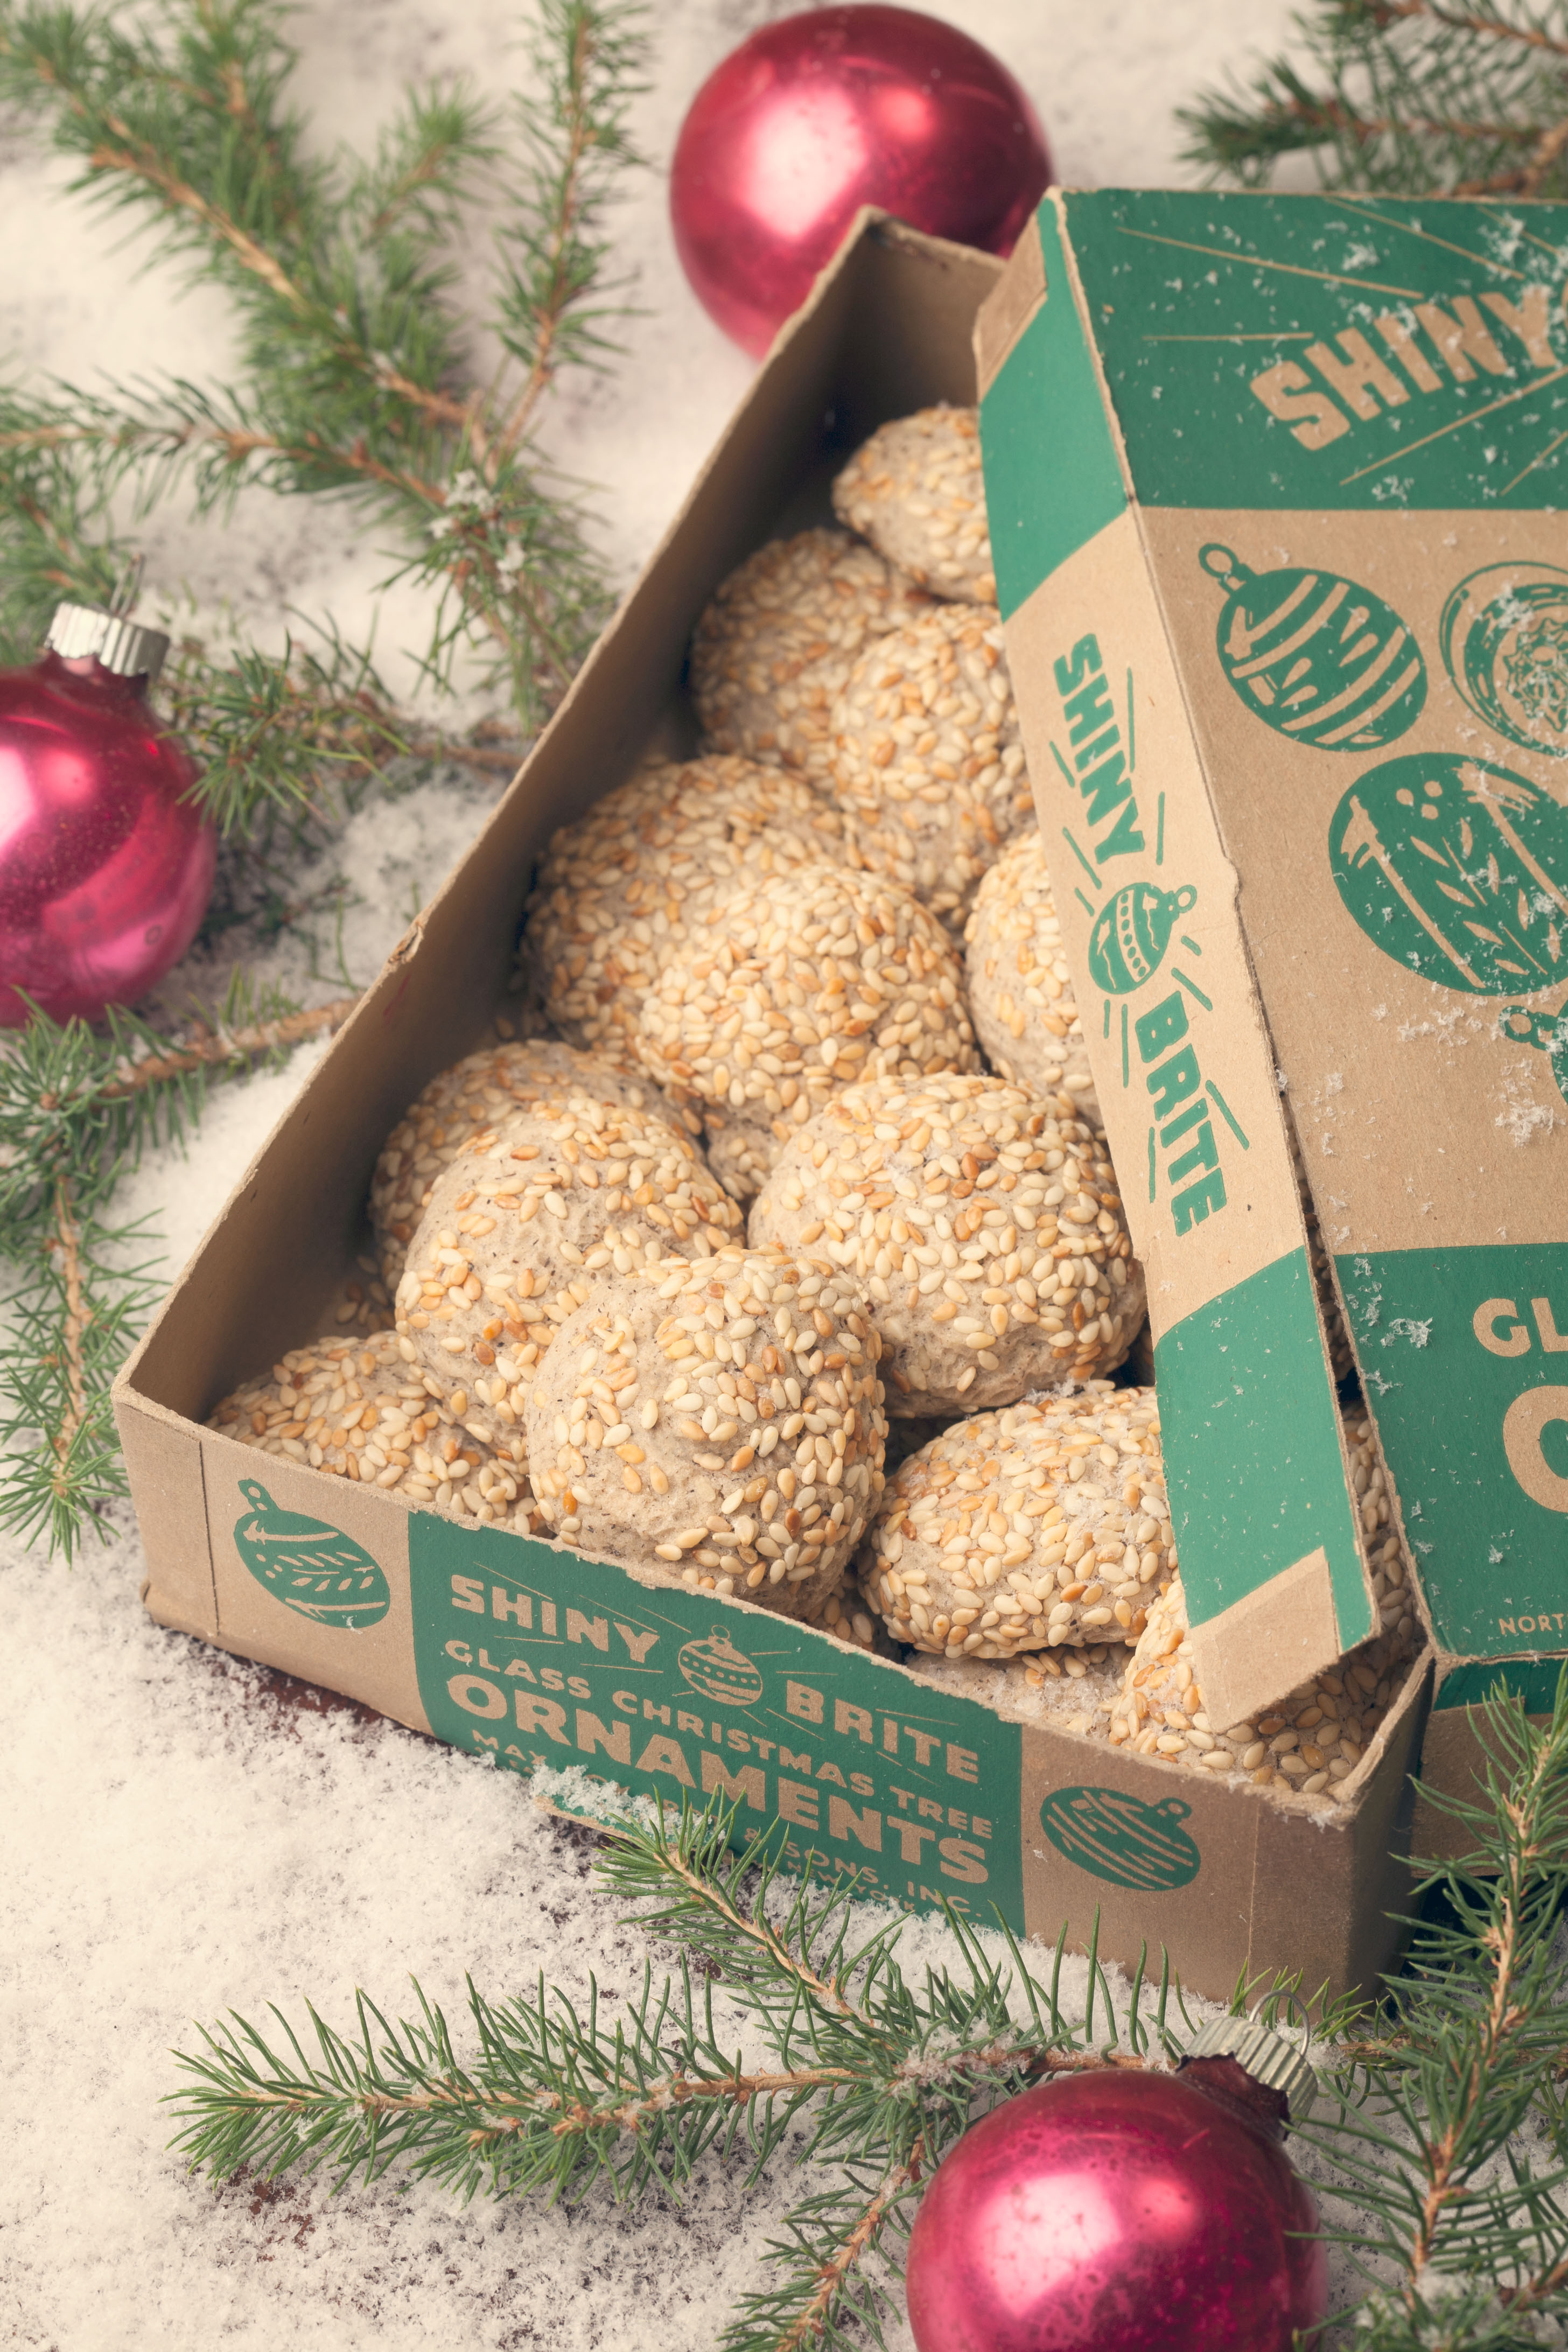 Toasted sesame cookies in a vintage ornament box surrounded by winter greens, ornaments and snow.